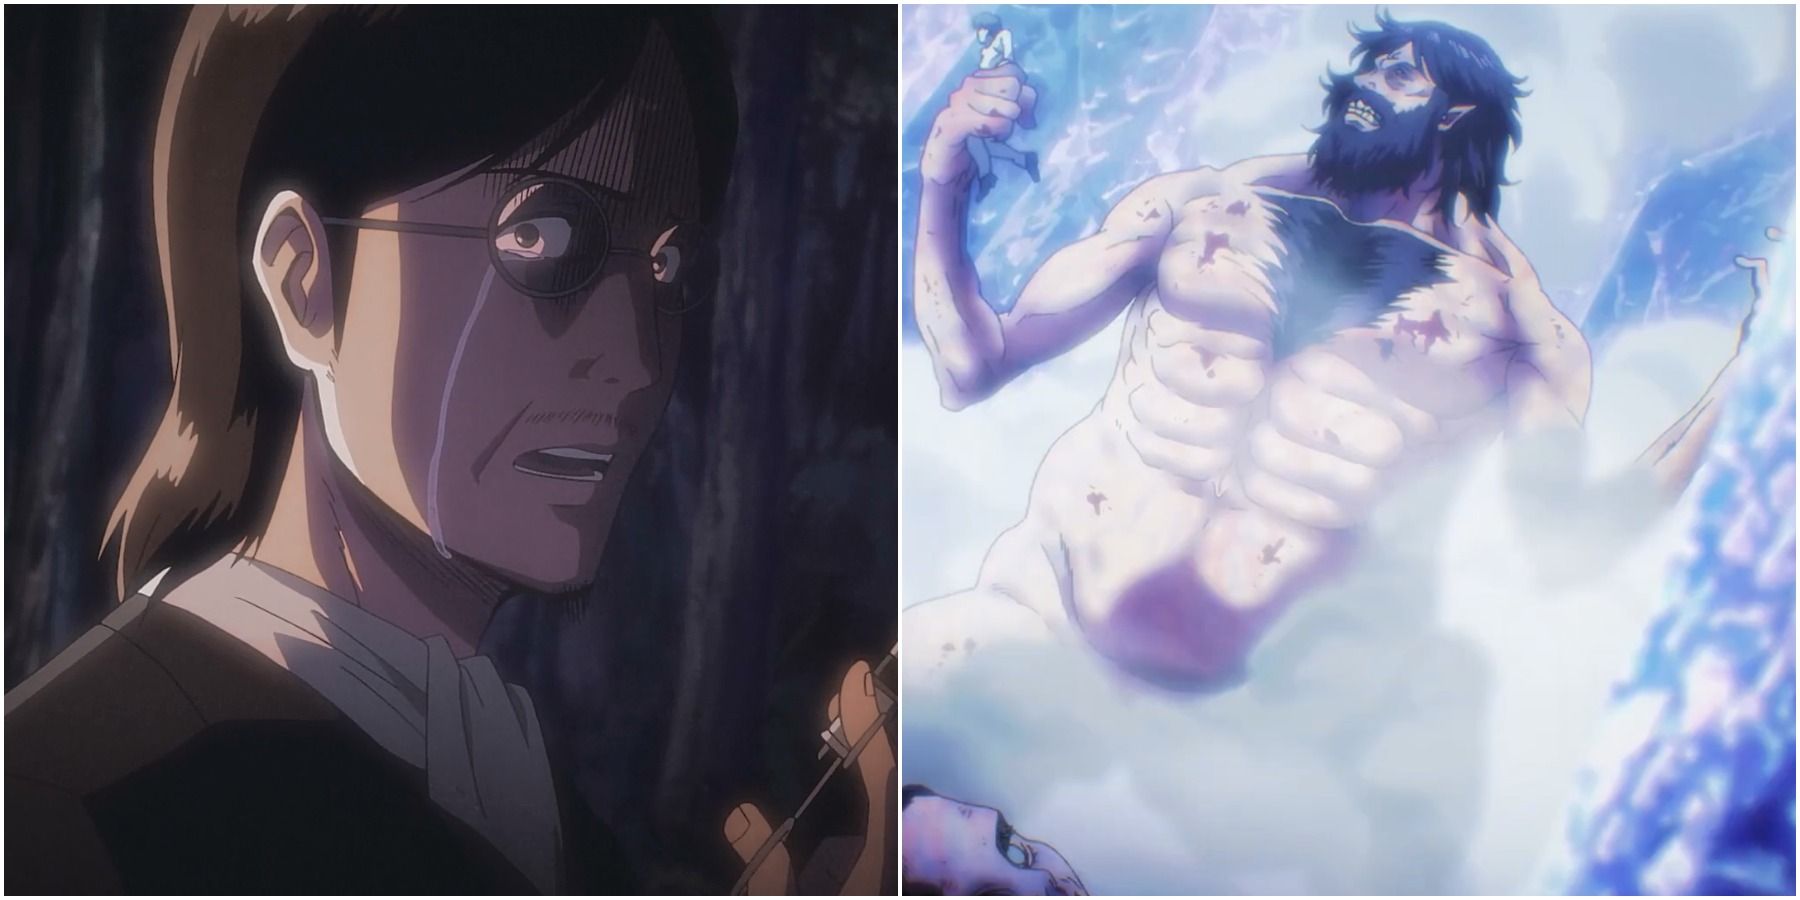 What did Eren Yeager tell Grisha Yeager with his Titan ability to